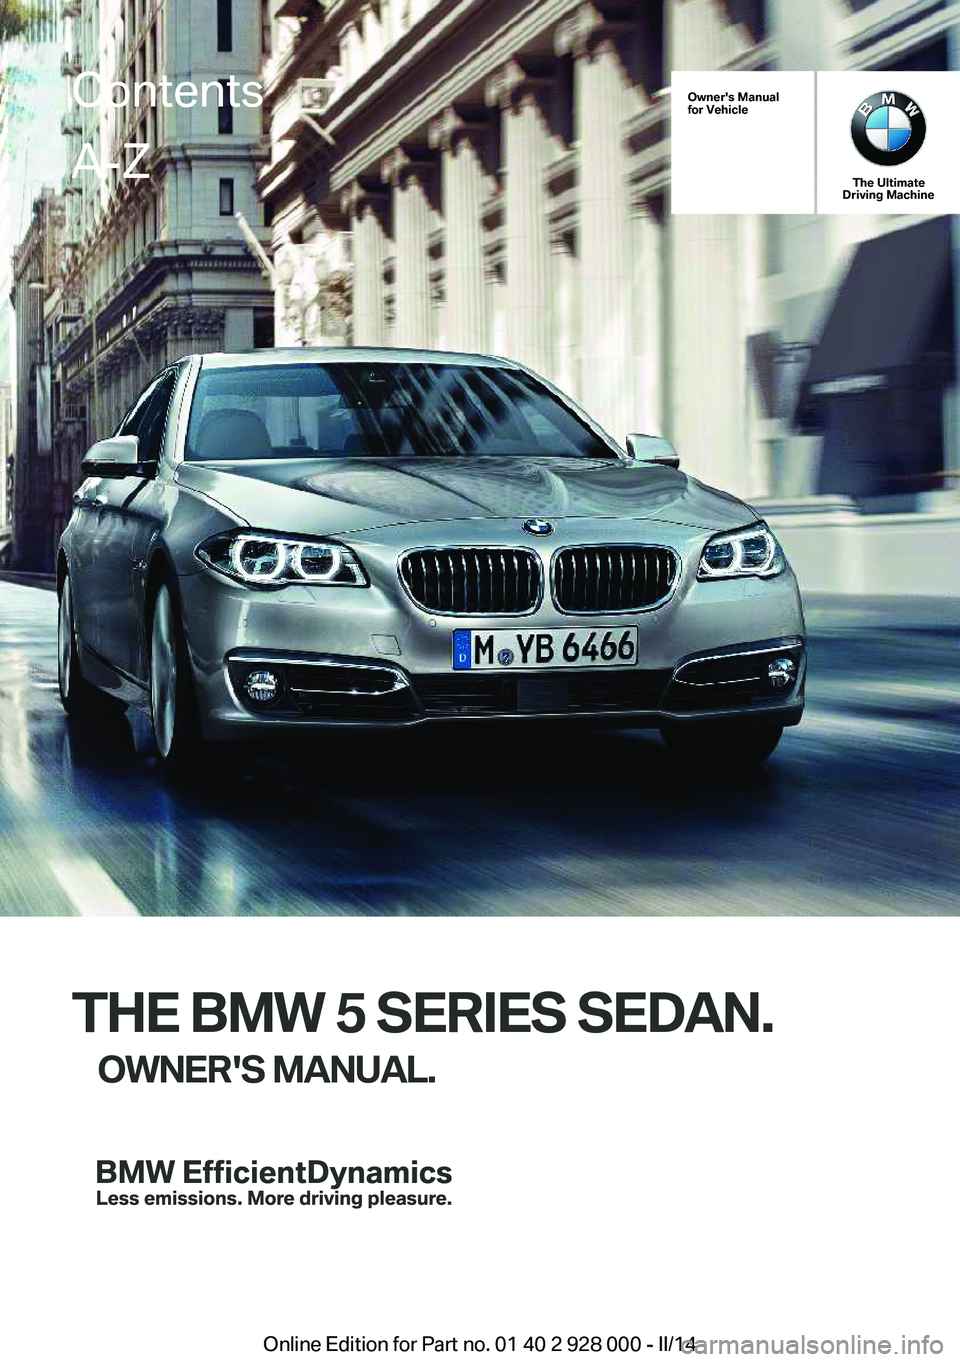 BMW 528I SEDAN 2014  Owners Manual Owner's Manual
for Vehicle
The Ultimate
Driving Machine
THE BMW 5 SERIES SEDAN.
OWNER'S MANUAL.
ContentsA-Z
Online Edition for Part no. 01 40 2 928 000 - II/14   